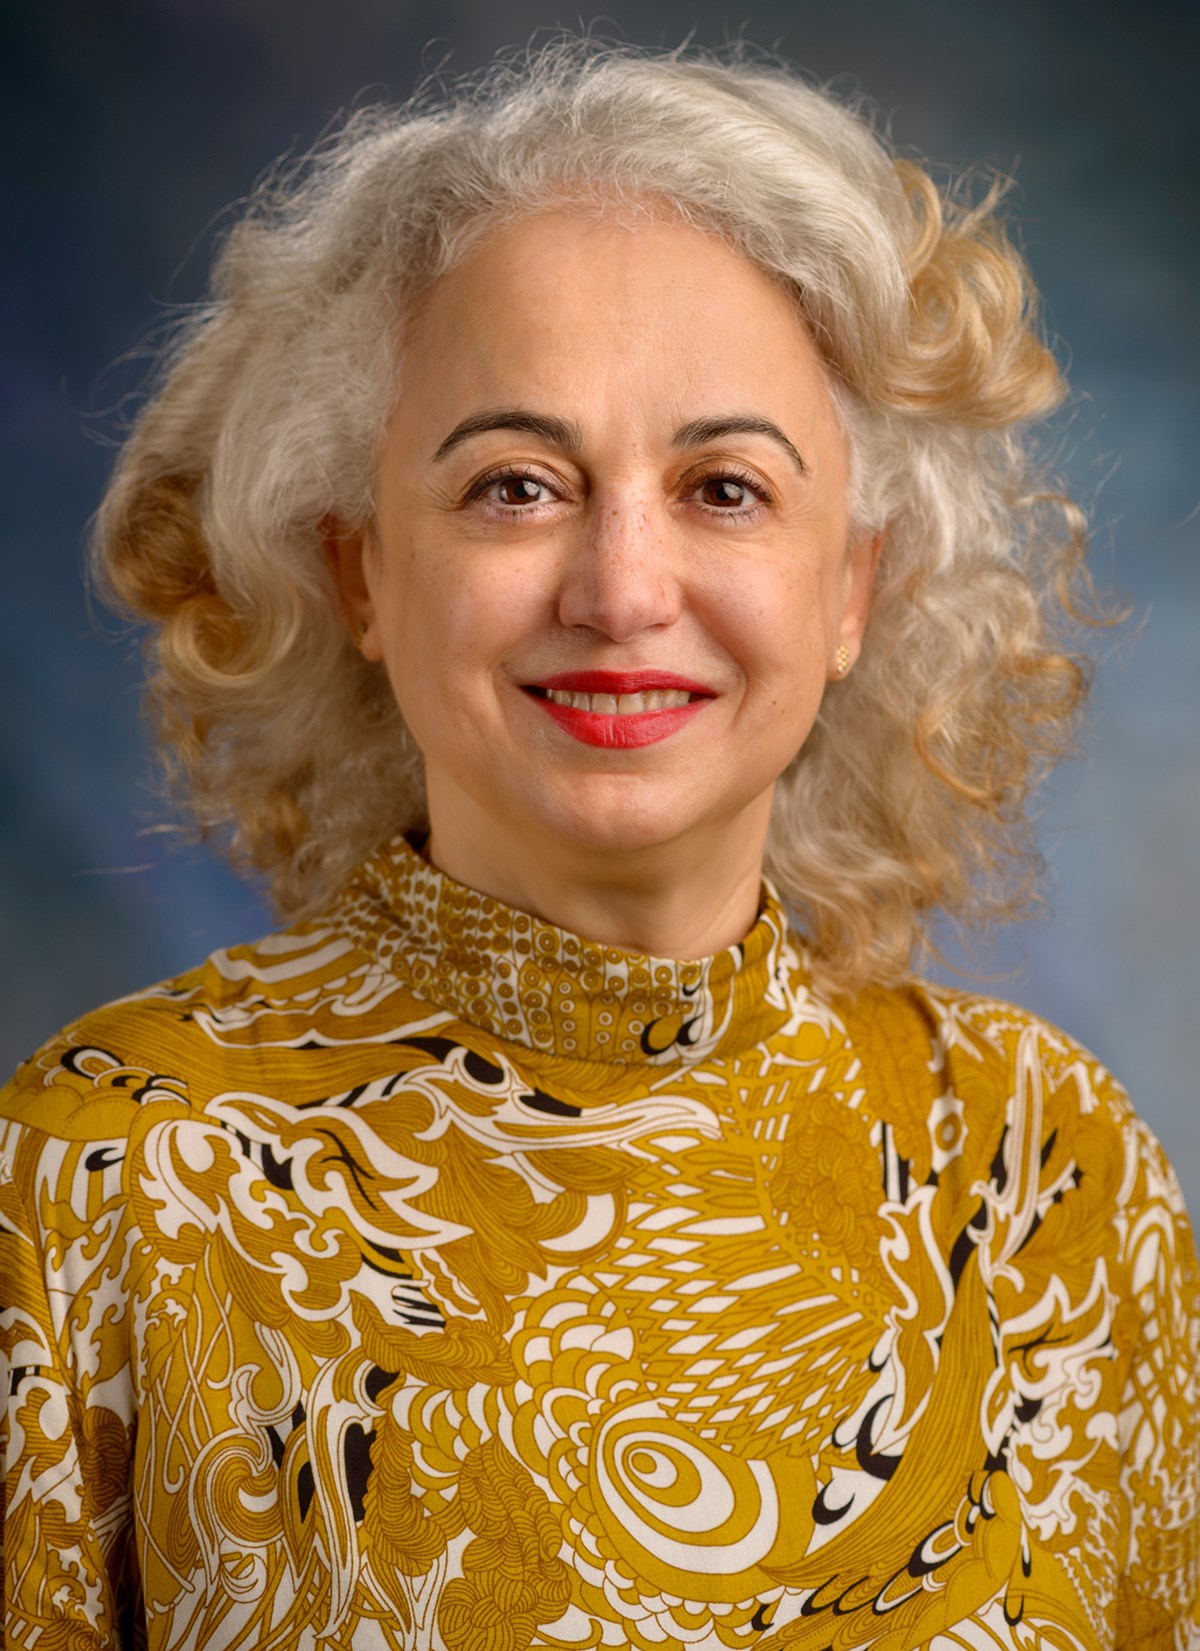 Iman Chahine, Ph.D. is the Co-Editor-Journal of Mathematics and Culture and an Associate Professor Mathematics Education in the College of Education at UMass Lowell.